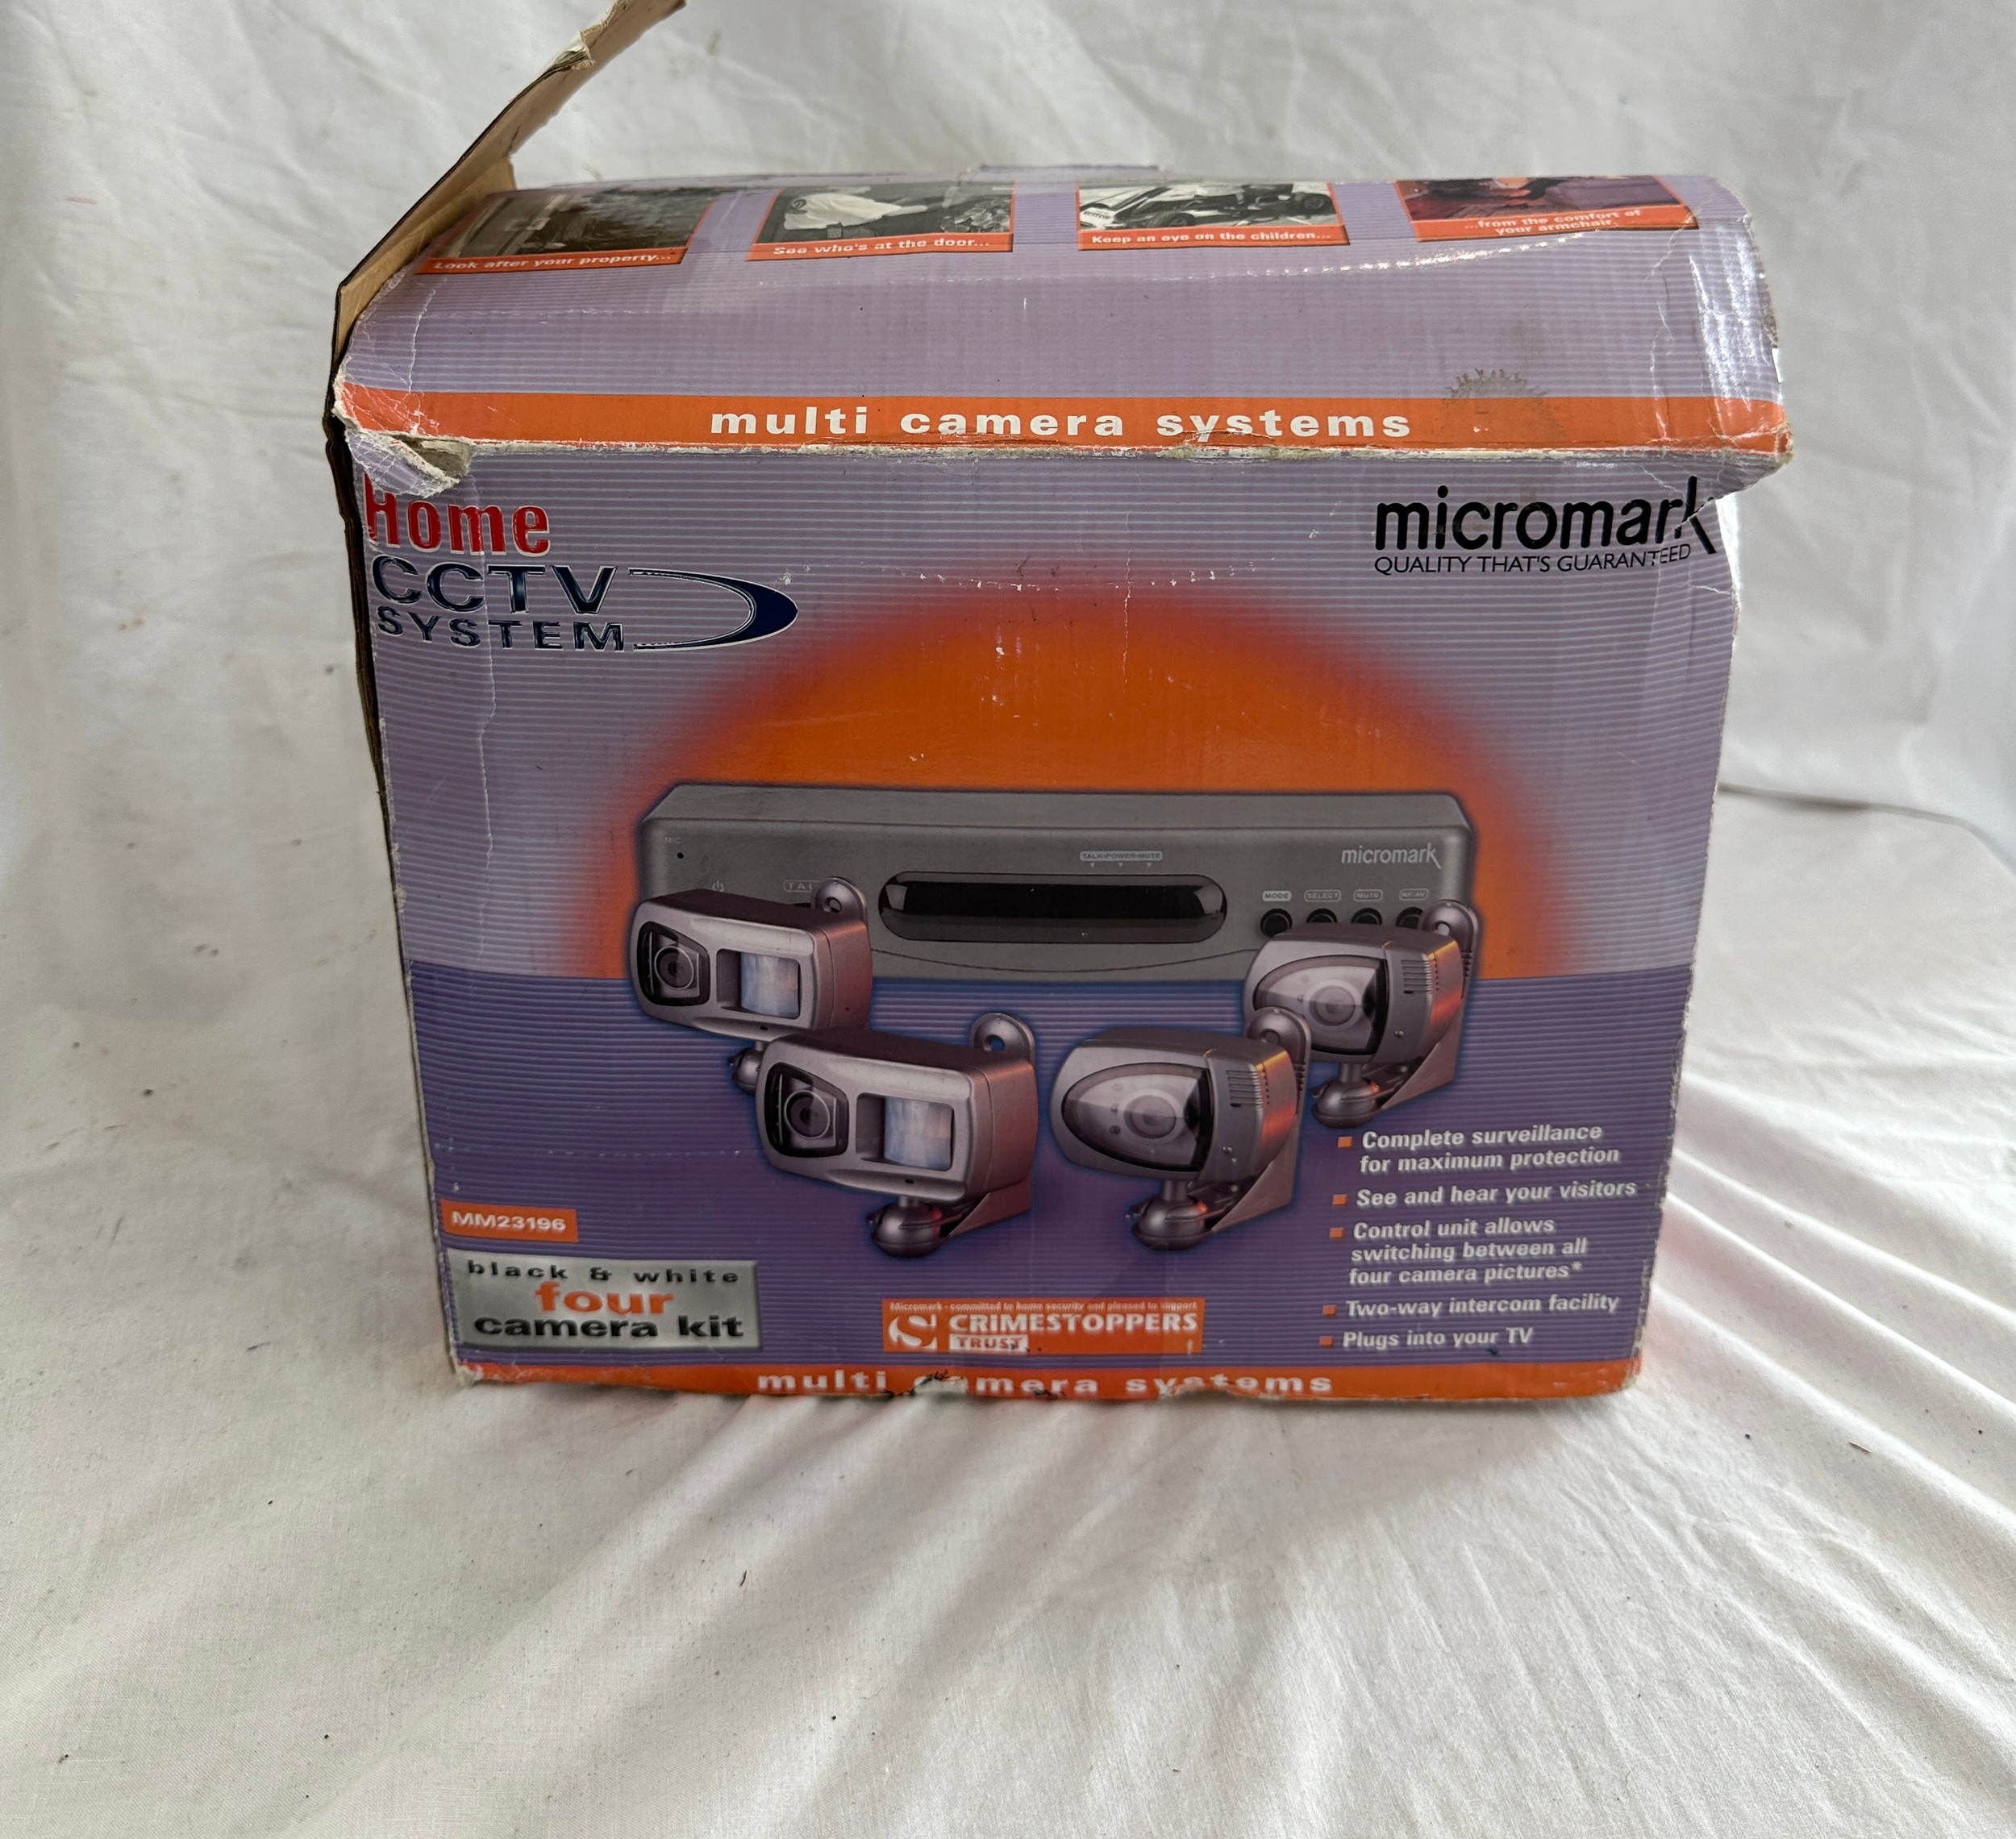 Boxed Micromade Home CCTV system